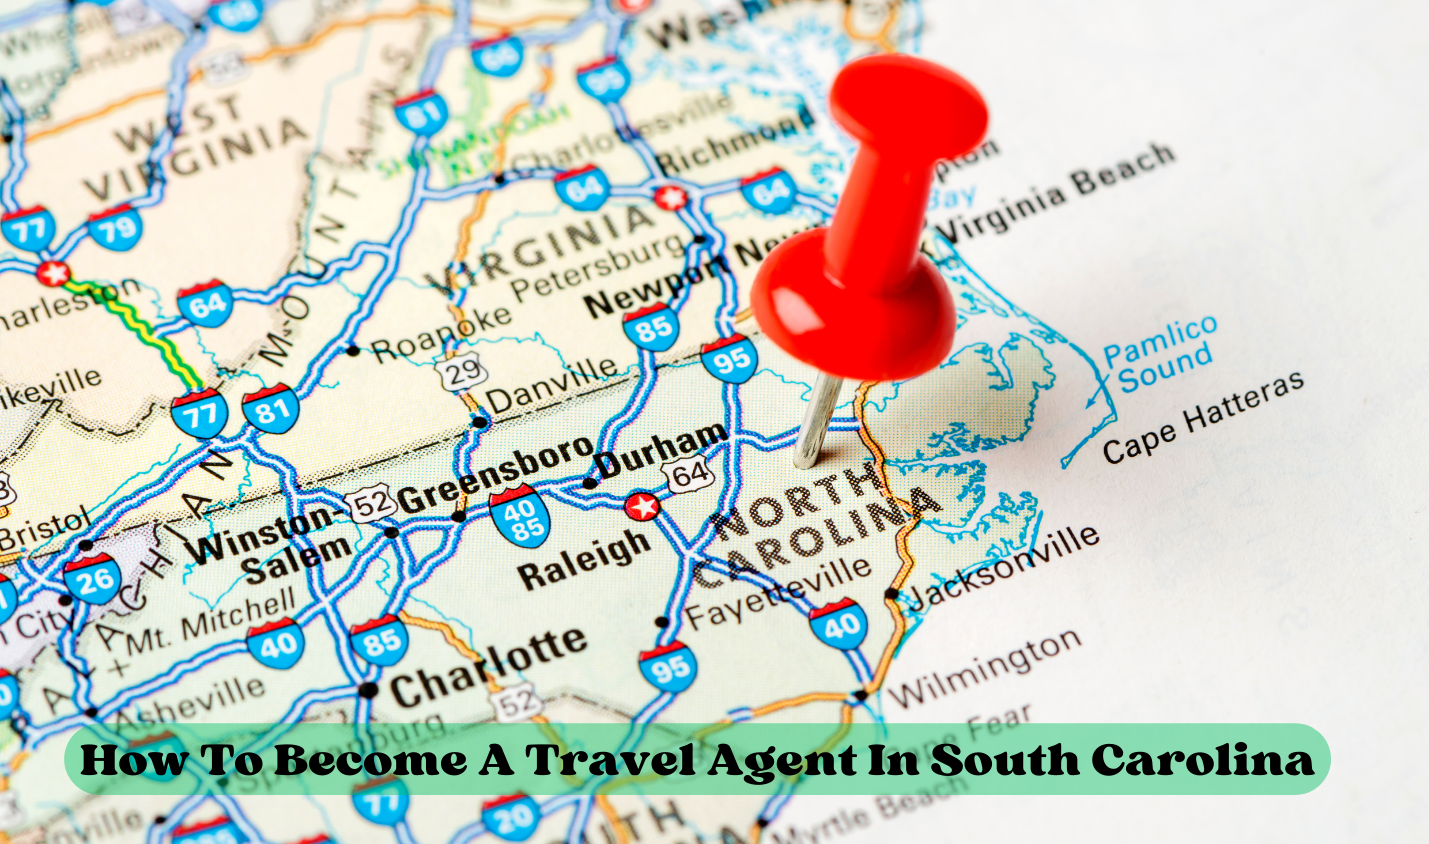 How To Become A Travel Agent In South Carolina